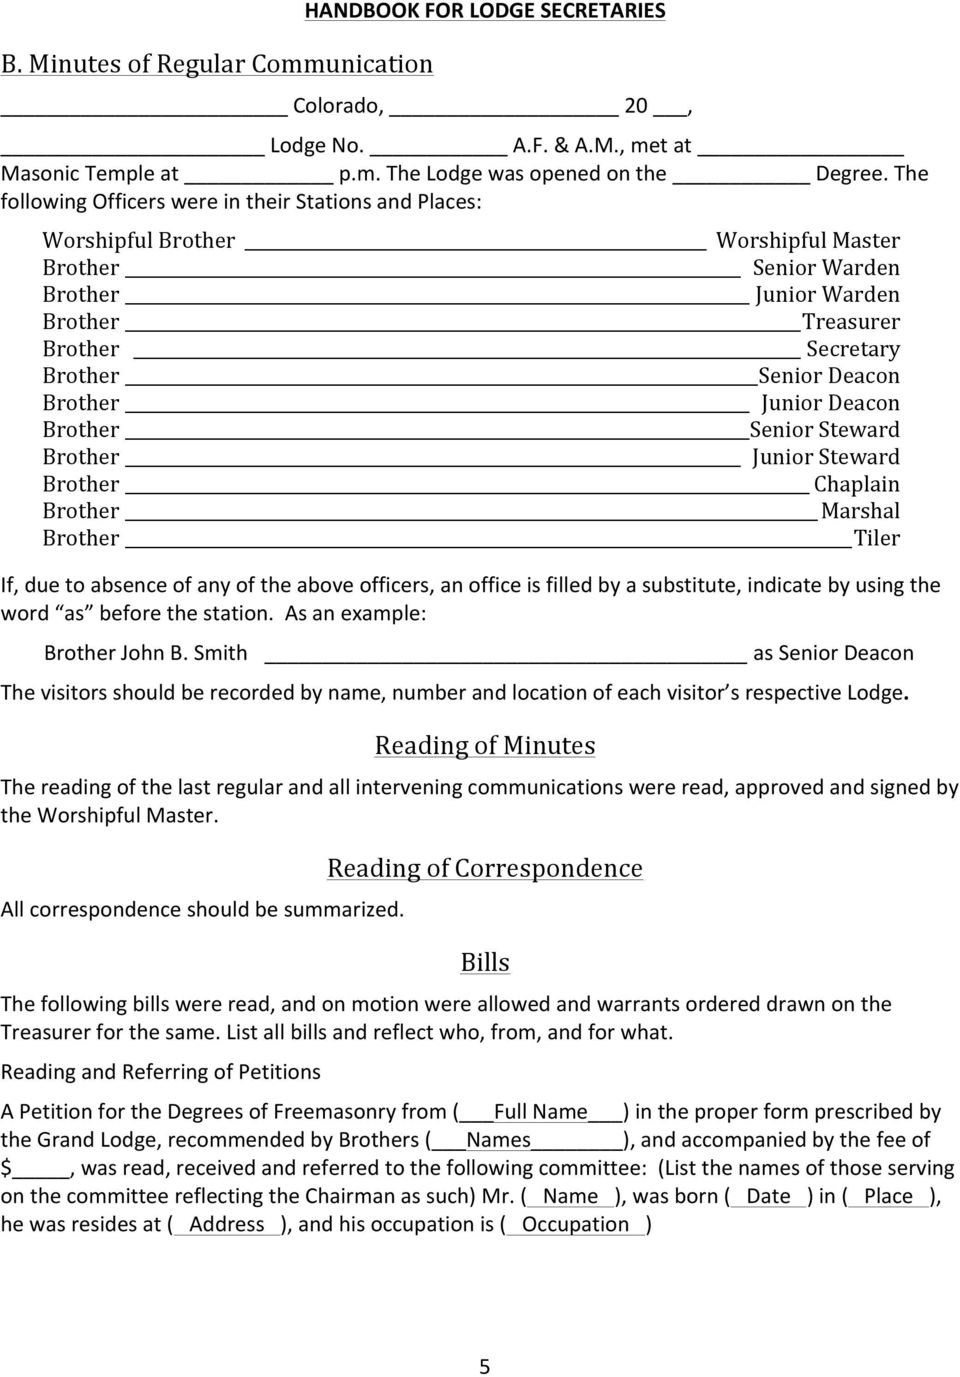 Masonic Meeting Minutes Template within sizing 960 X 1377